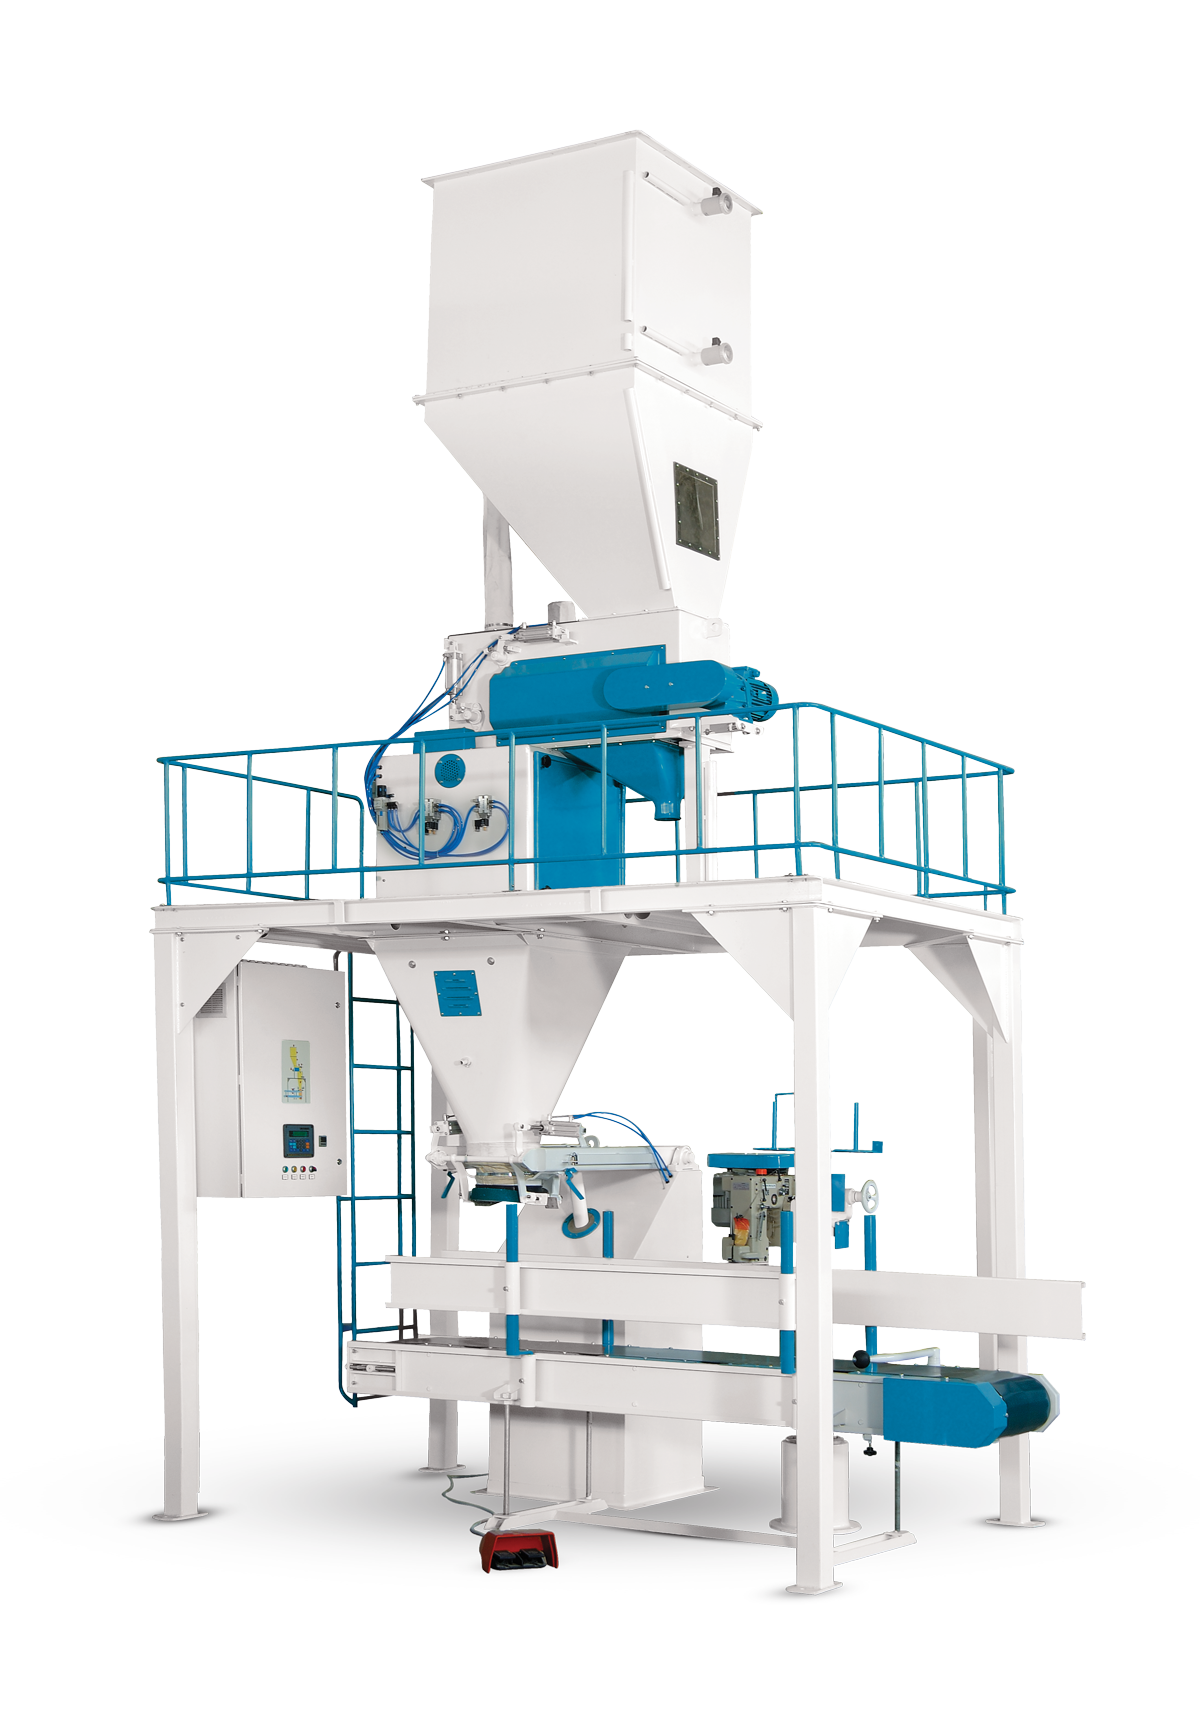 Flour Bagging Machine System With Double Weigh Hopper & Single Station 5/10 Kg3